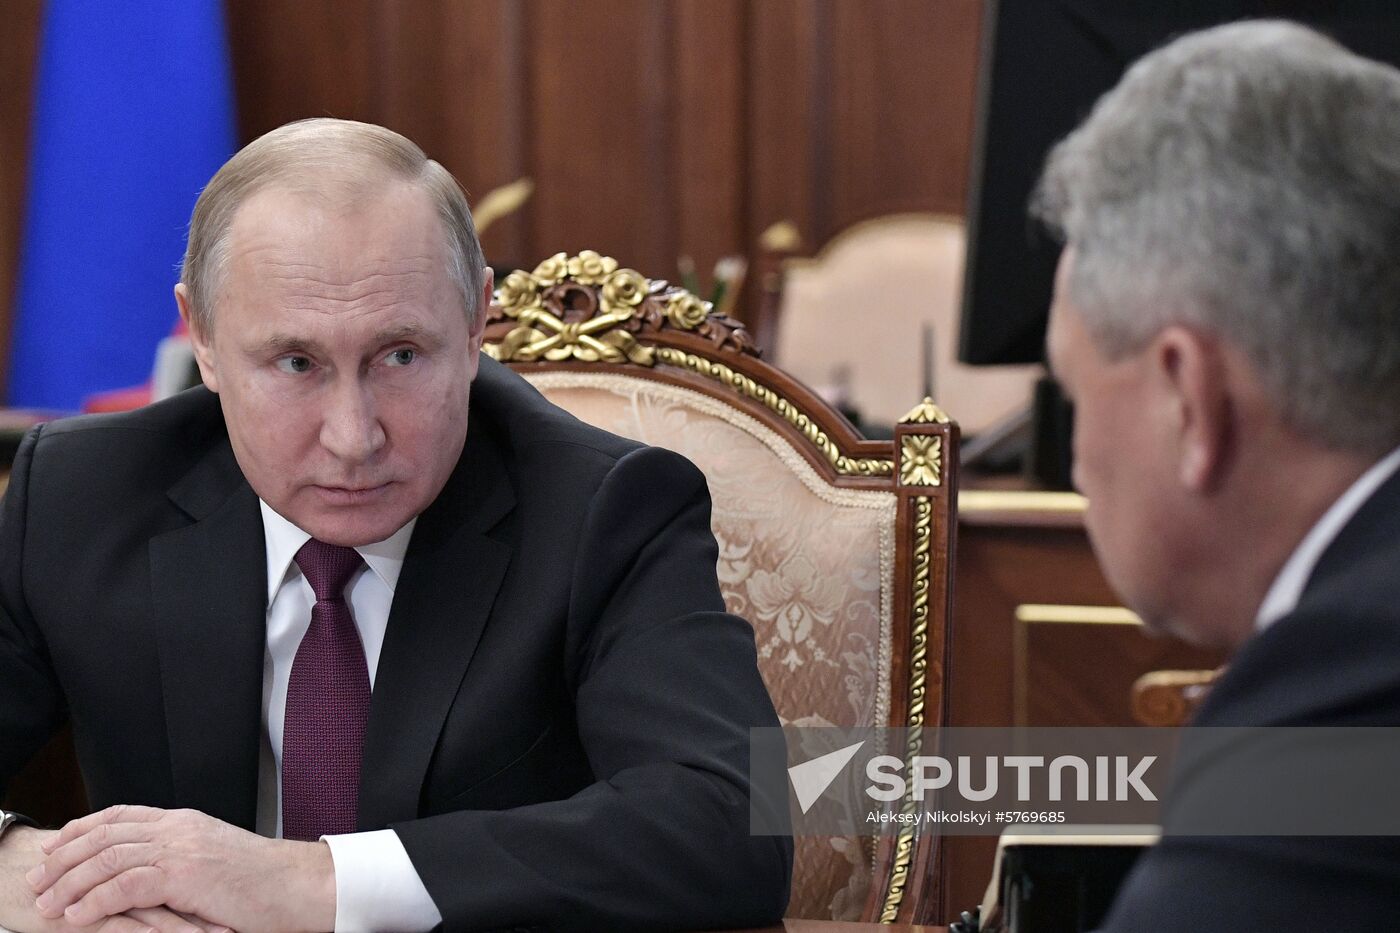 President Vladimir Putin meets with Foreign Minister Lavrov and Defence Minister Shoigu